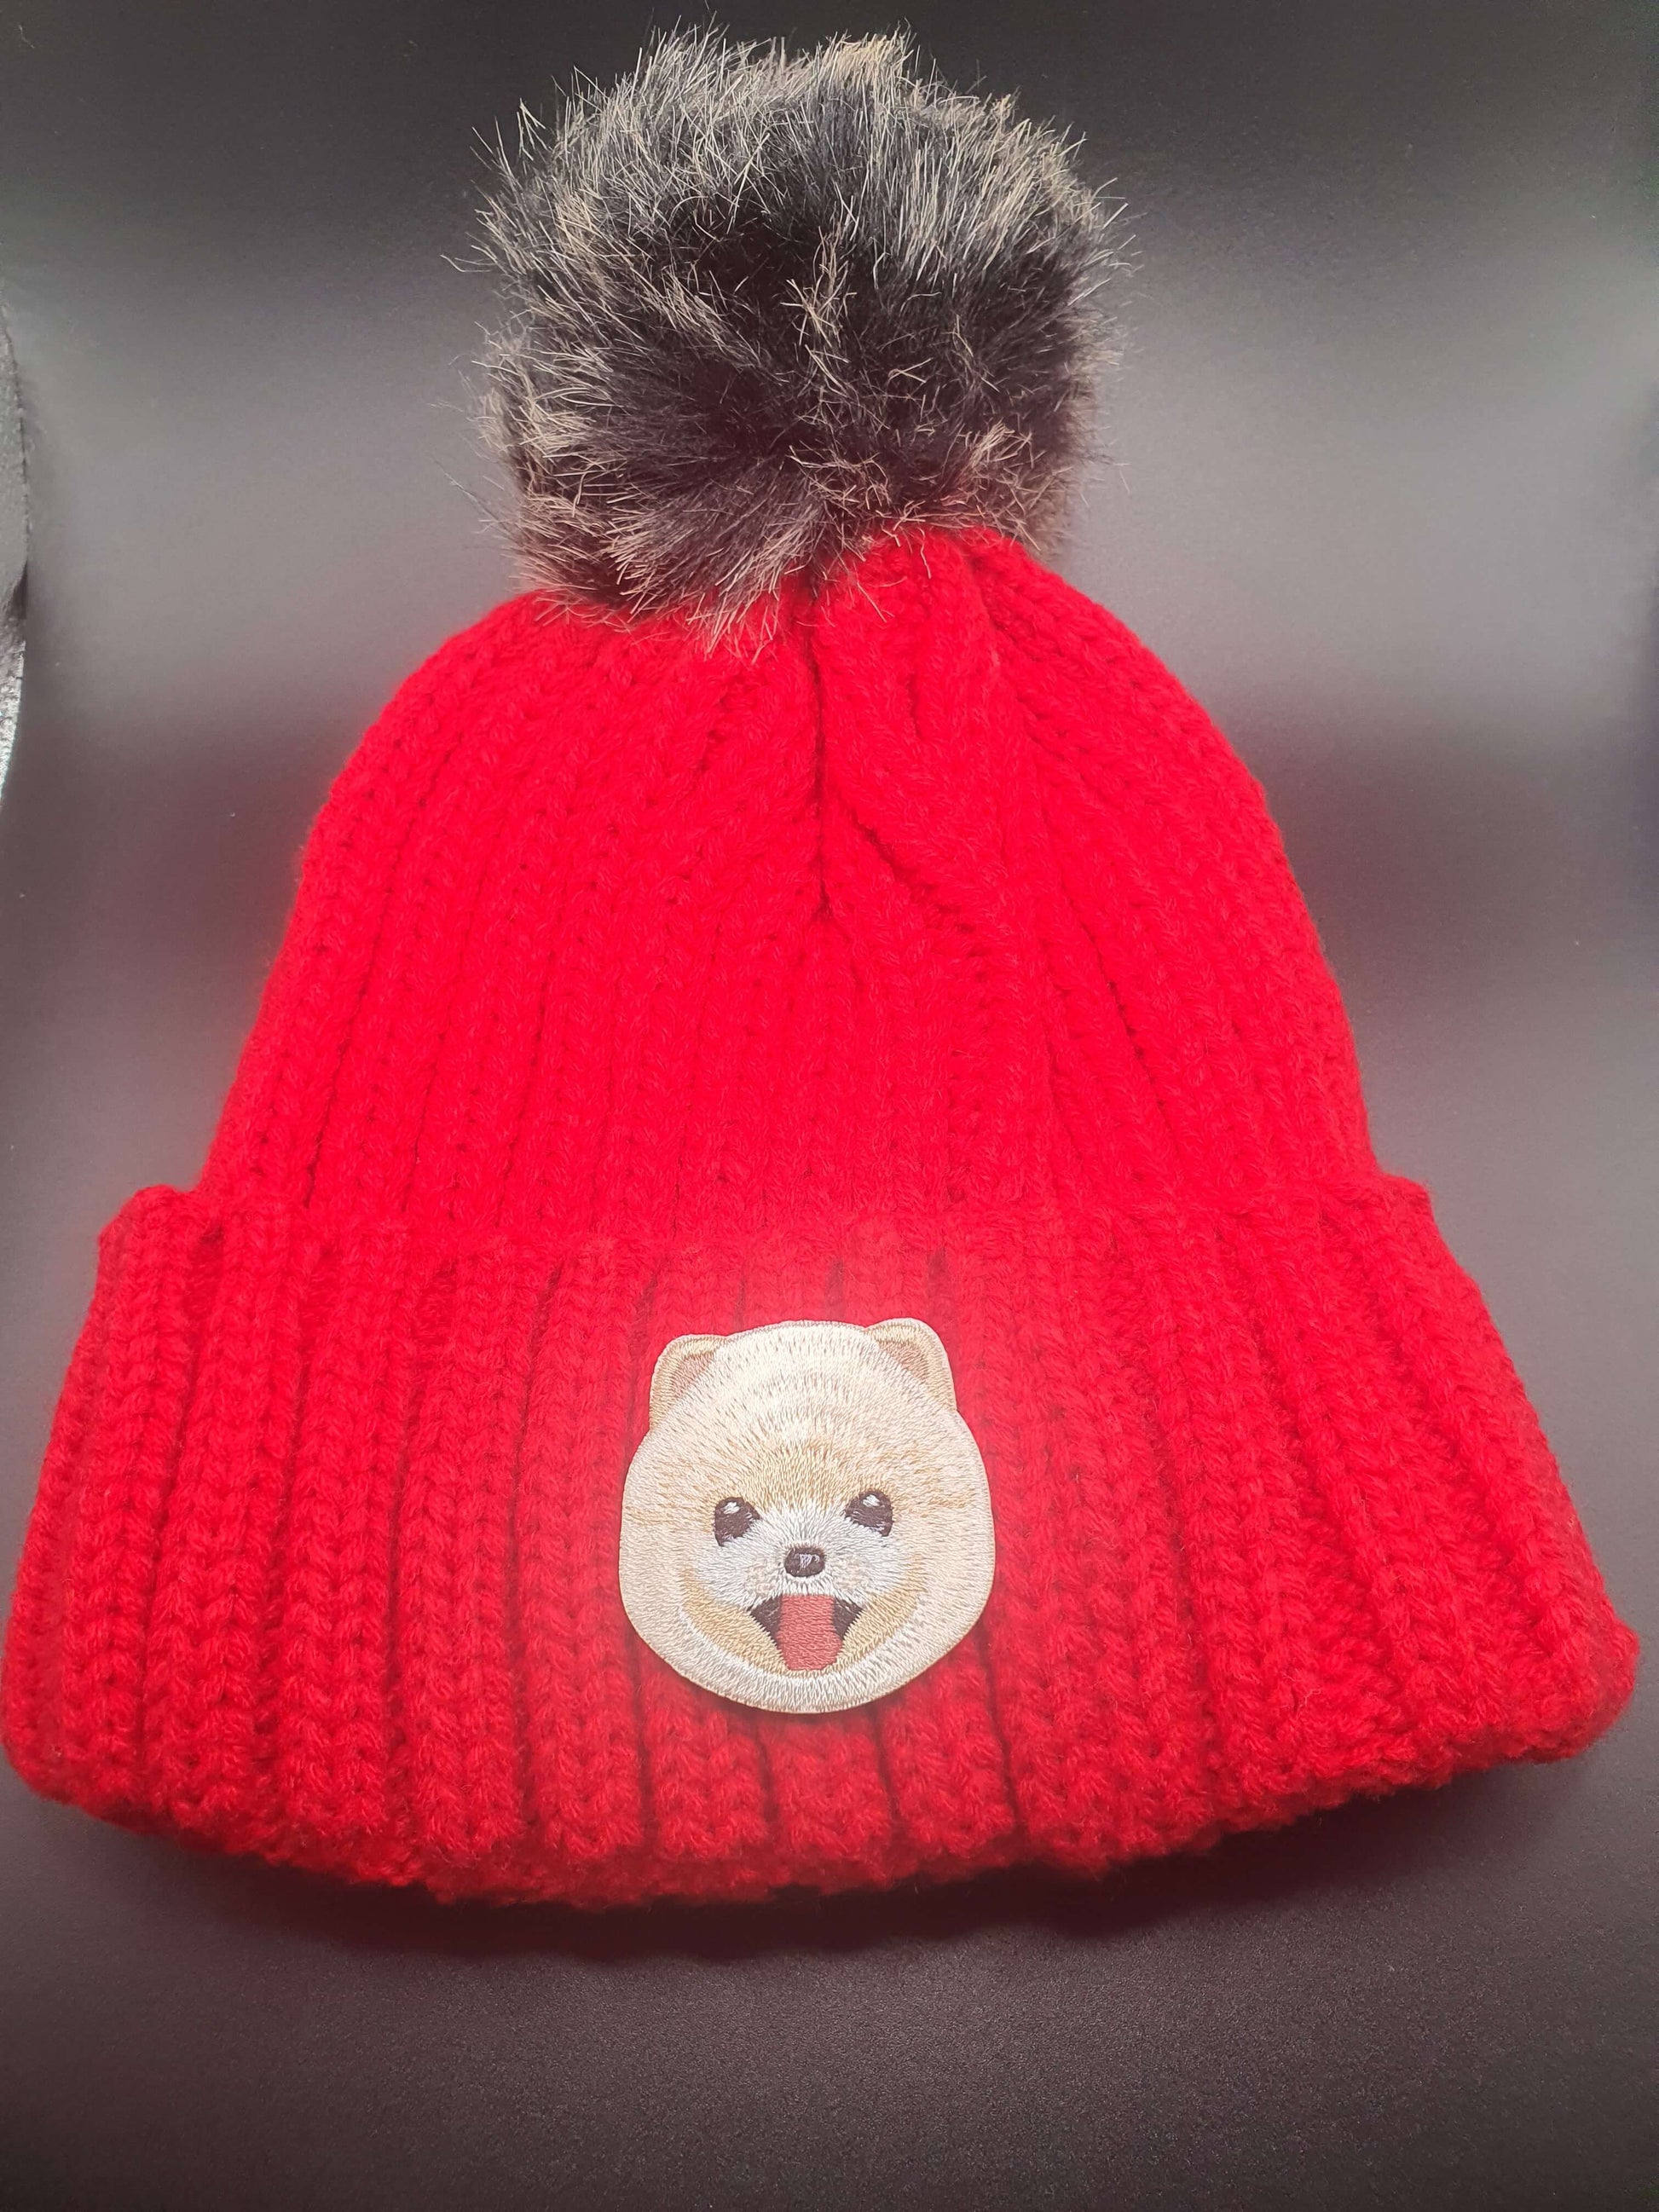 Dog Themed Knitted Beanies - Style's Bug Pomeranian / Red